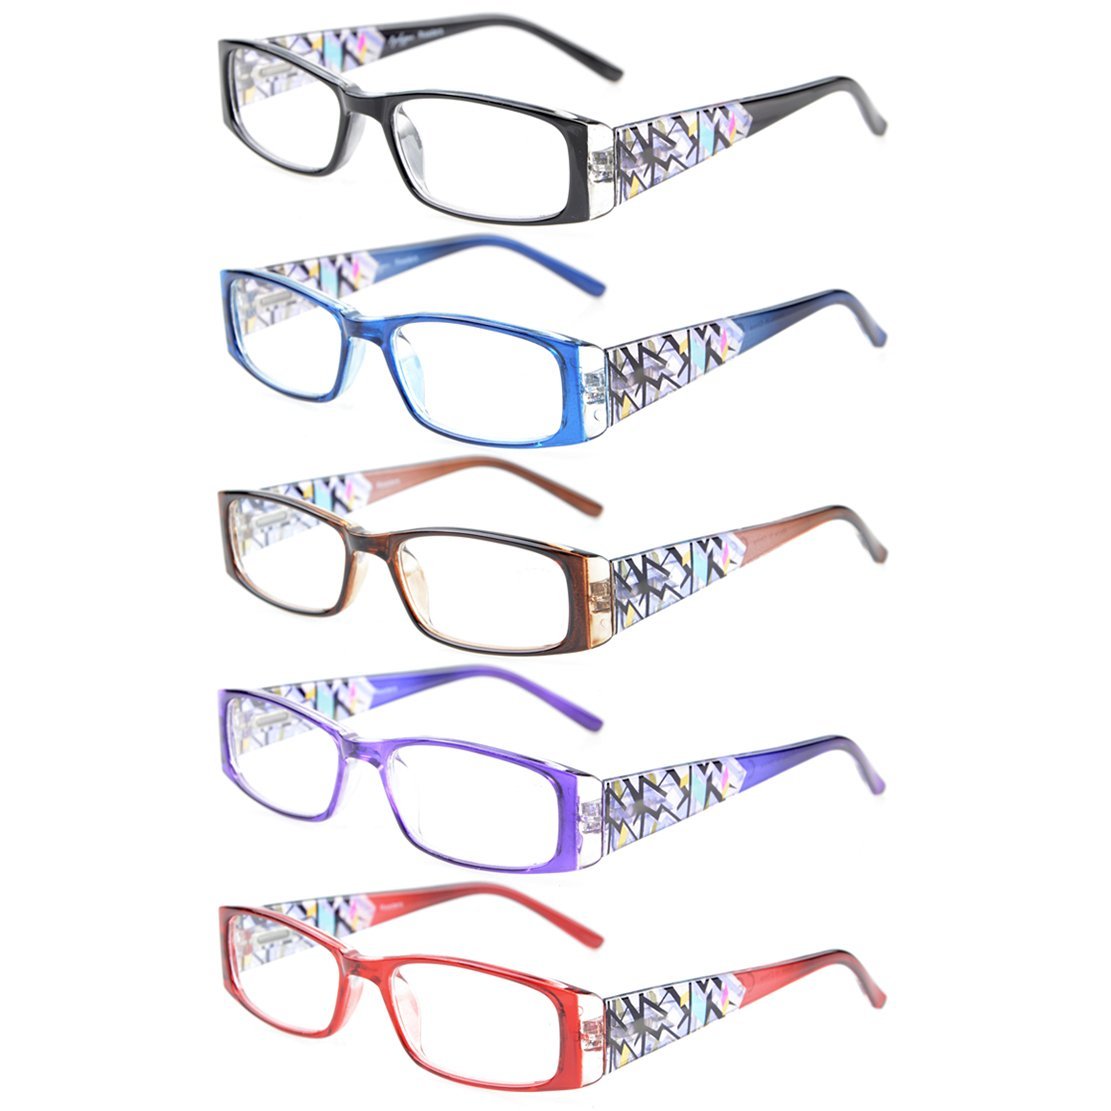 5 Pack Fashionable Reading Glasses with Crystal Arms for Women ...